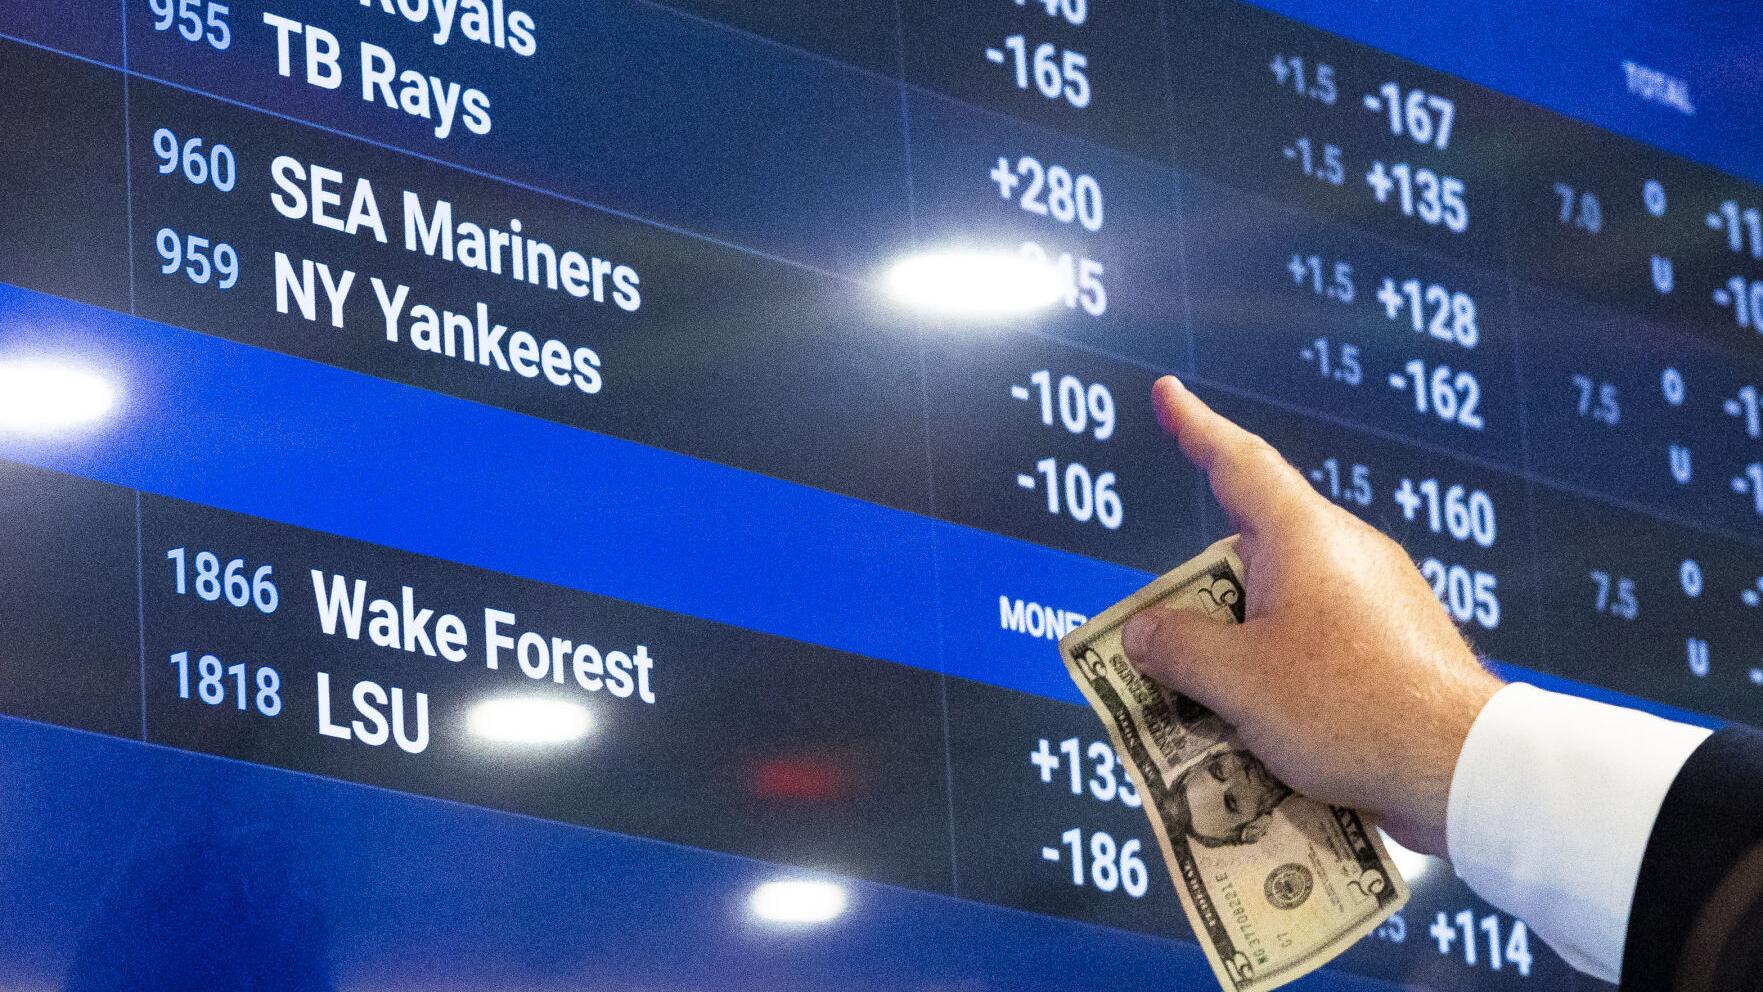 WarHorse Lincoln's sportsbook manager: The next sports betting scandal is inevitable